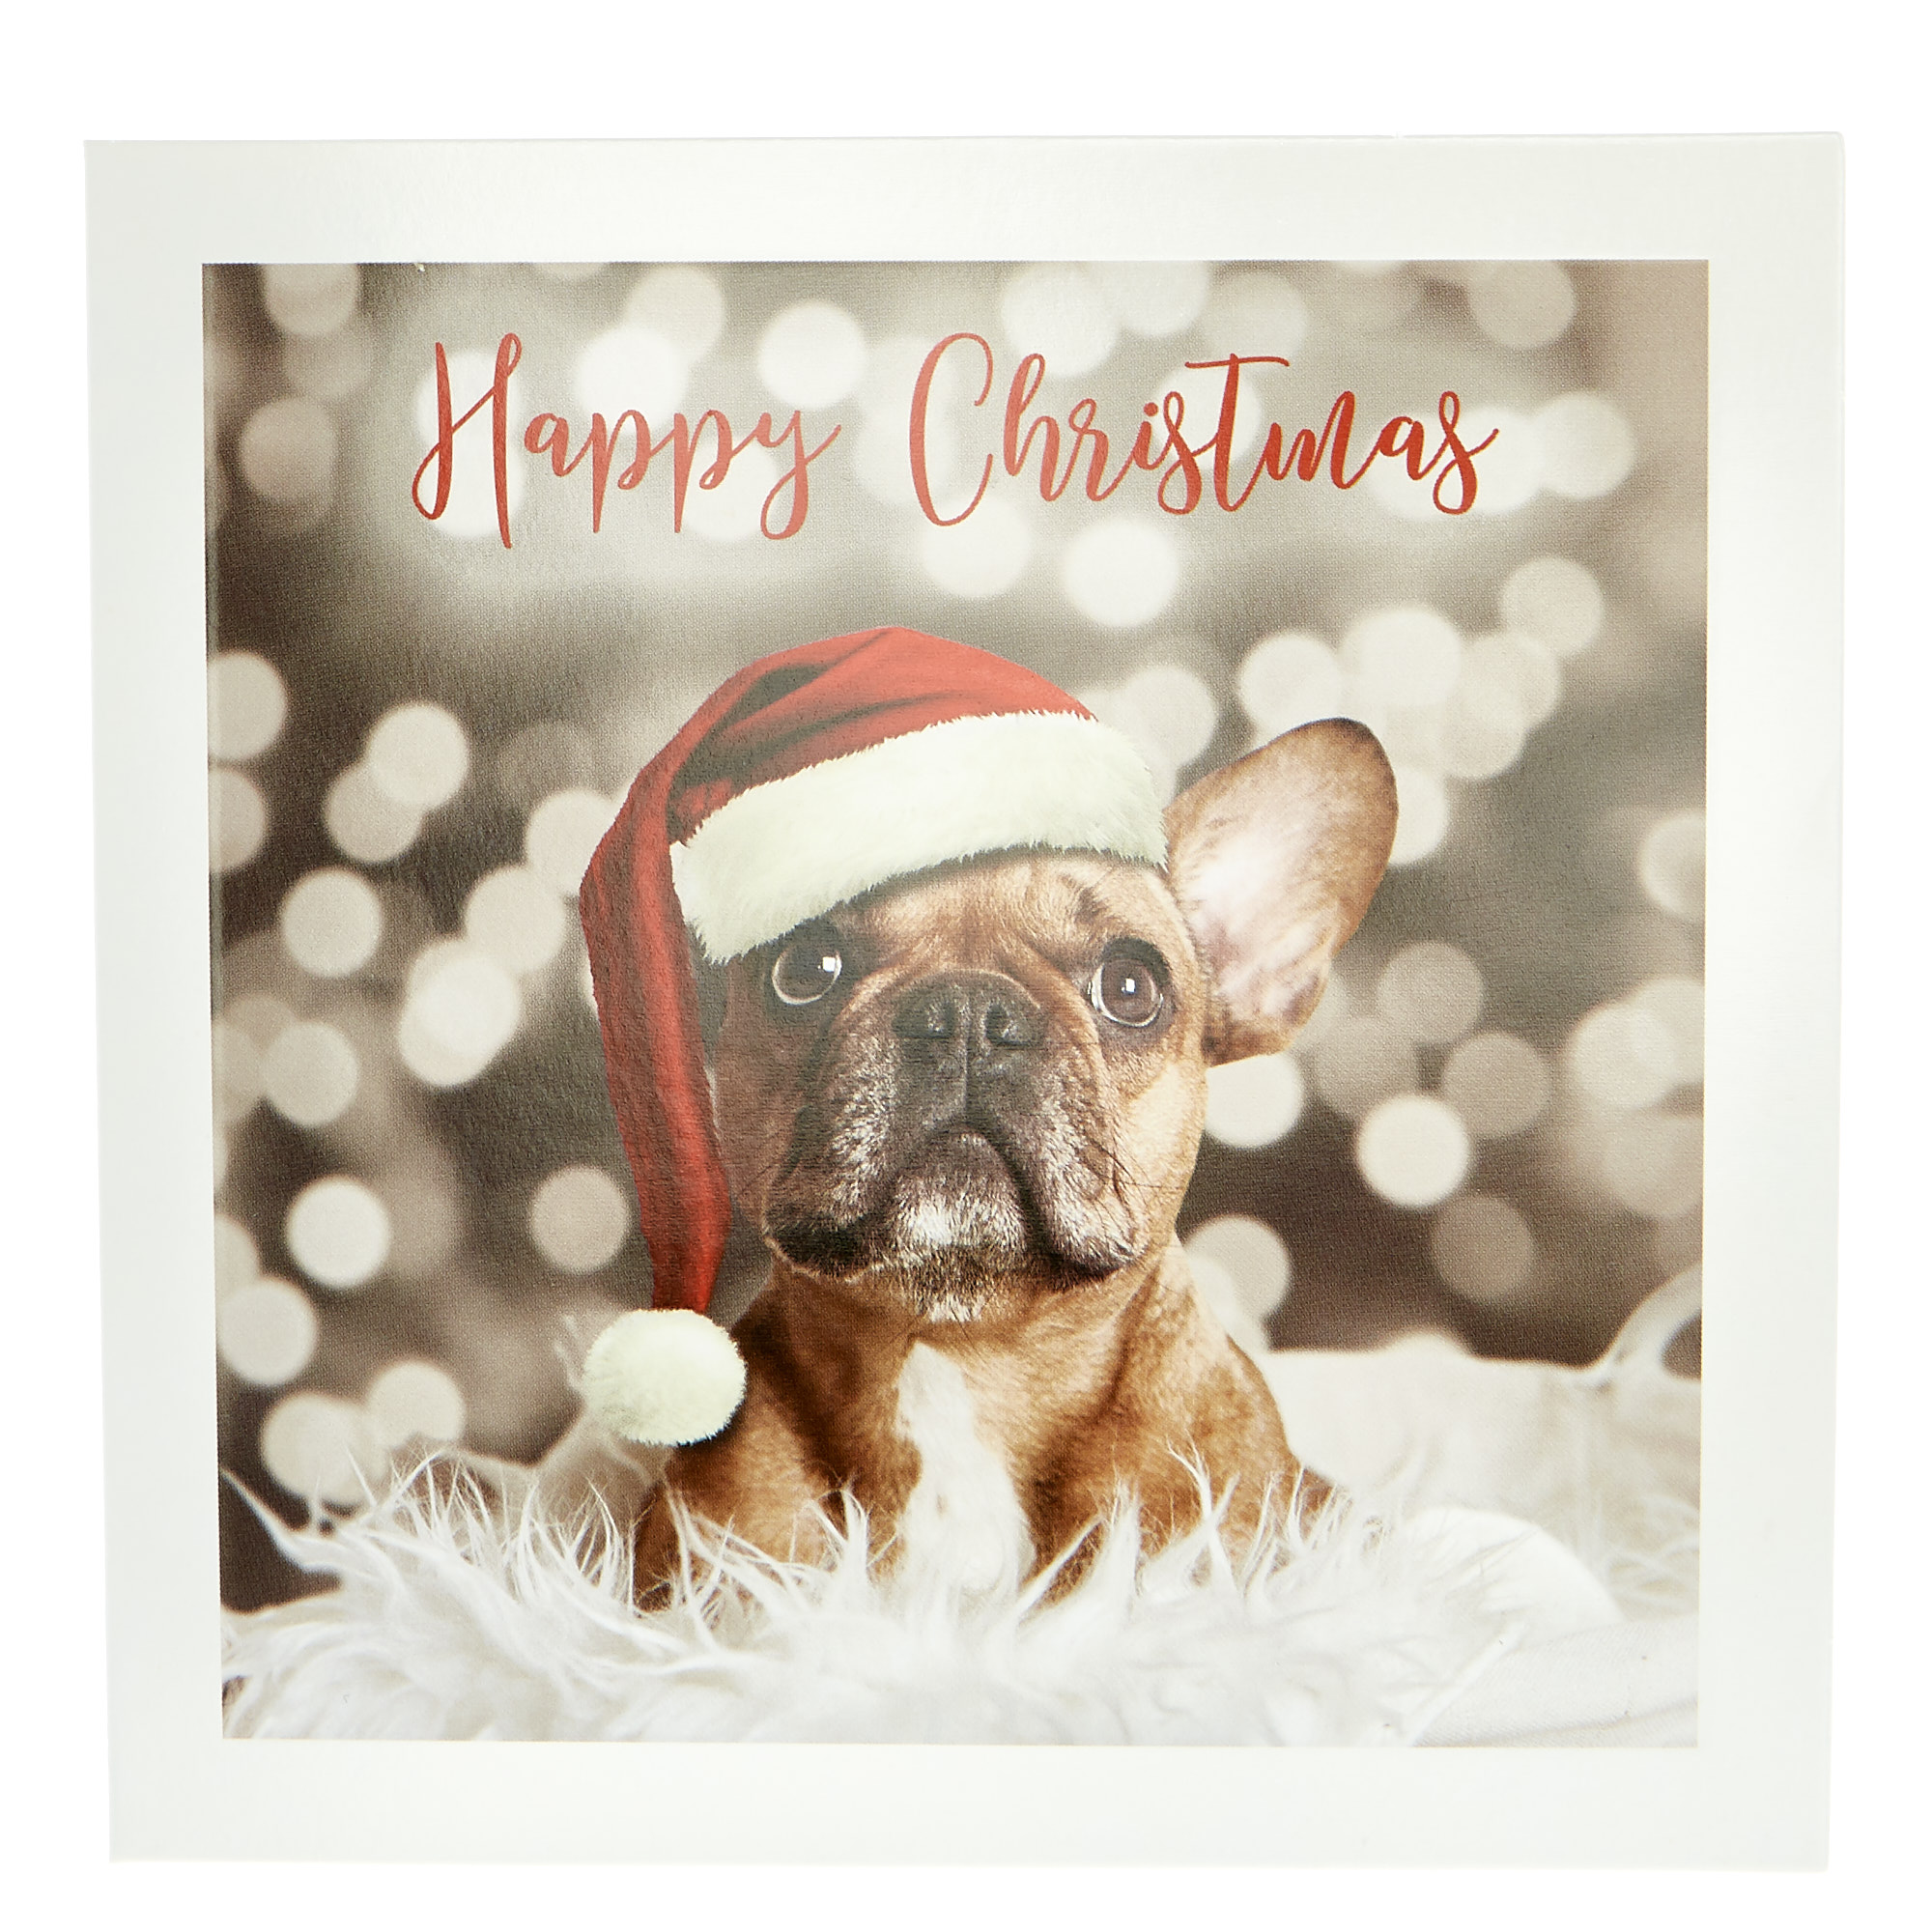 20 Dog-Themed Charity Christmas Cards - 4 Designs 